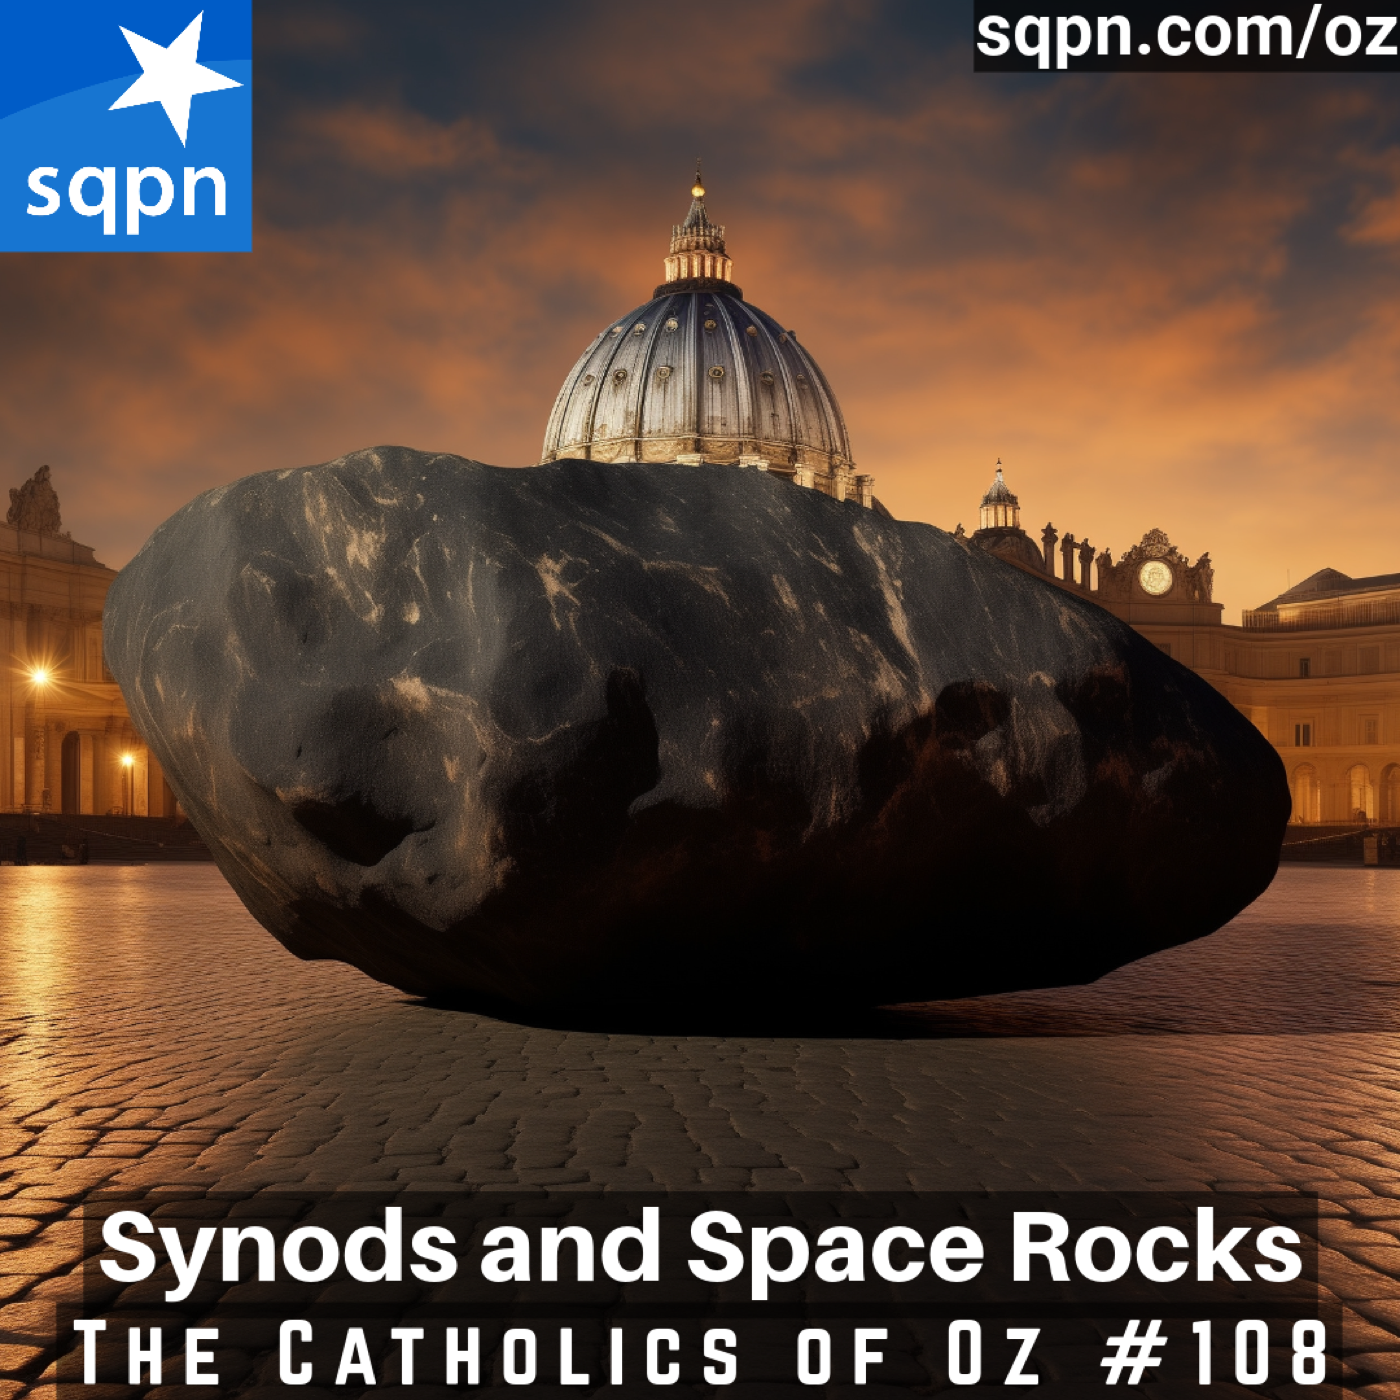 Synods and Space Rocks